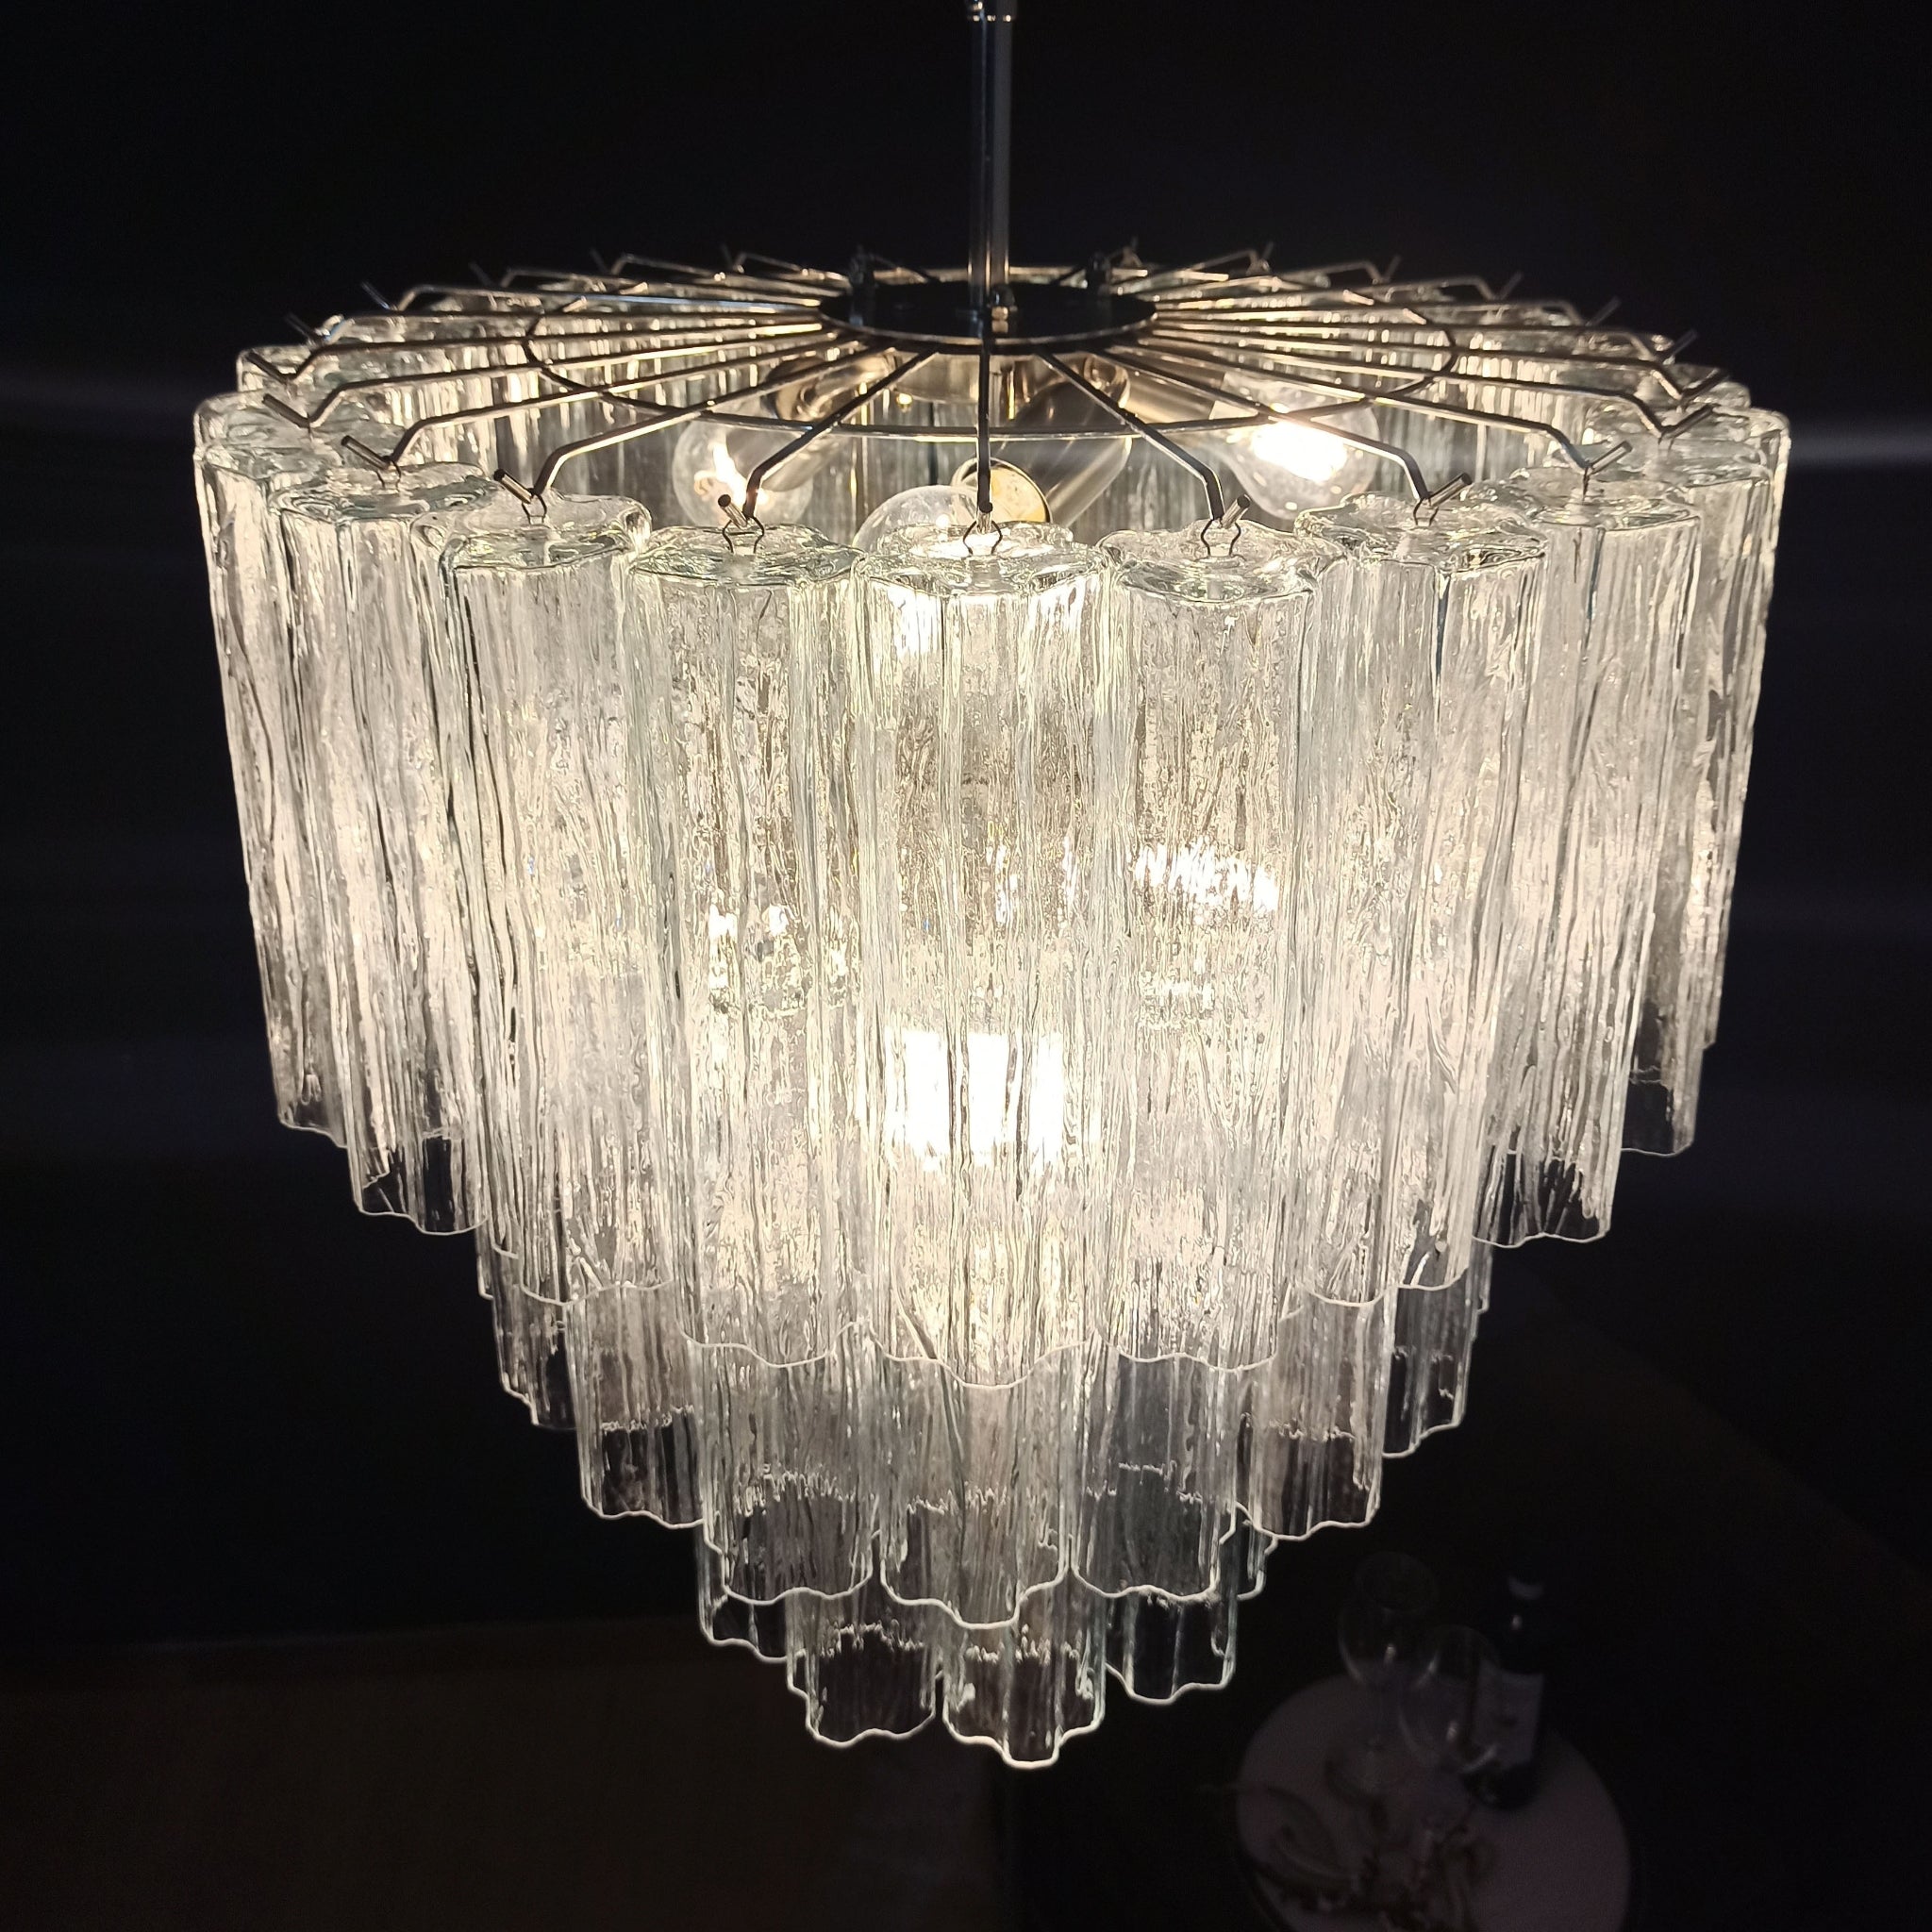 Murano Glass Tube Chandelier with 52 glasses